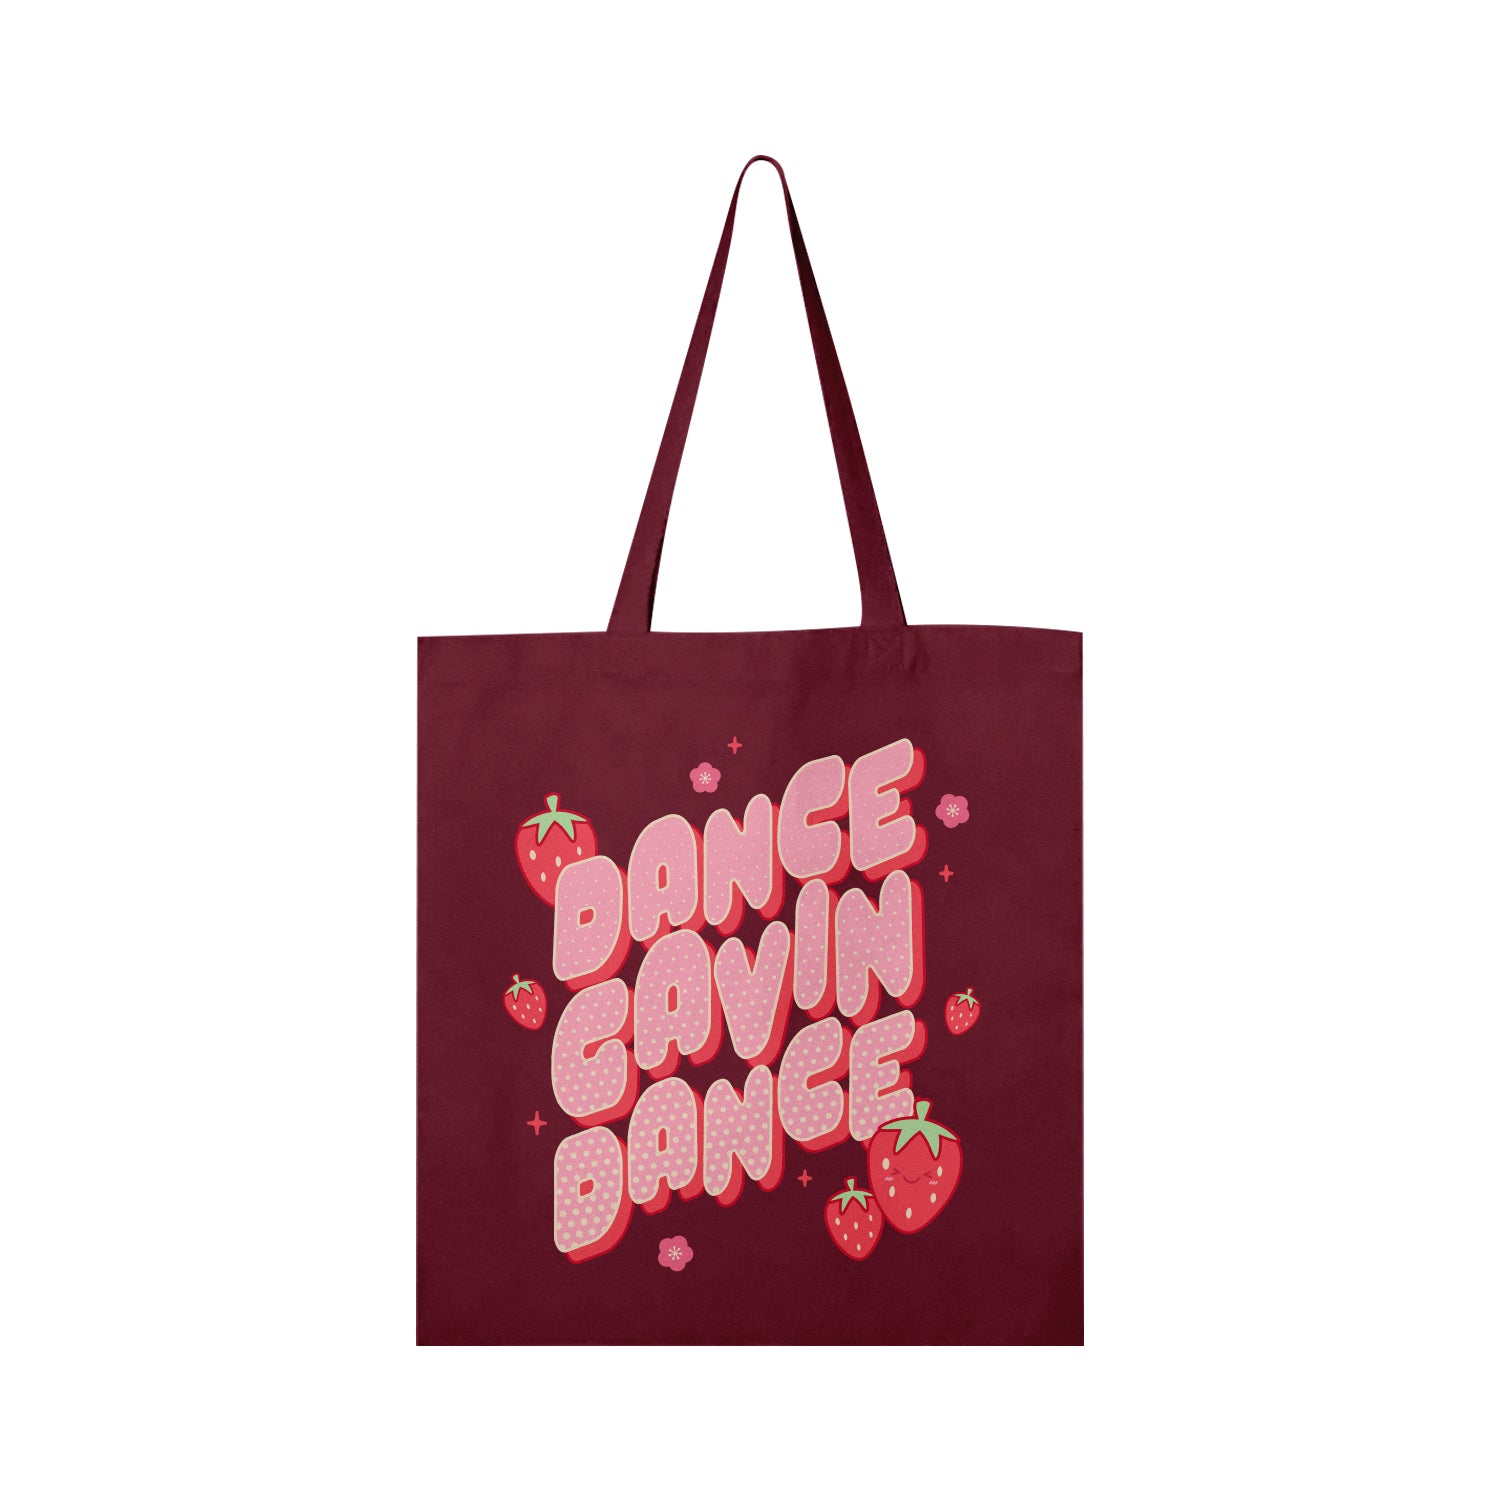 image of a maroon tote bag on a white background. the tote has a full print in pink that says dance gavin dance with red strawberries surrounding it